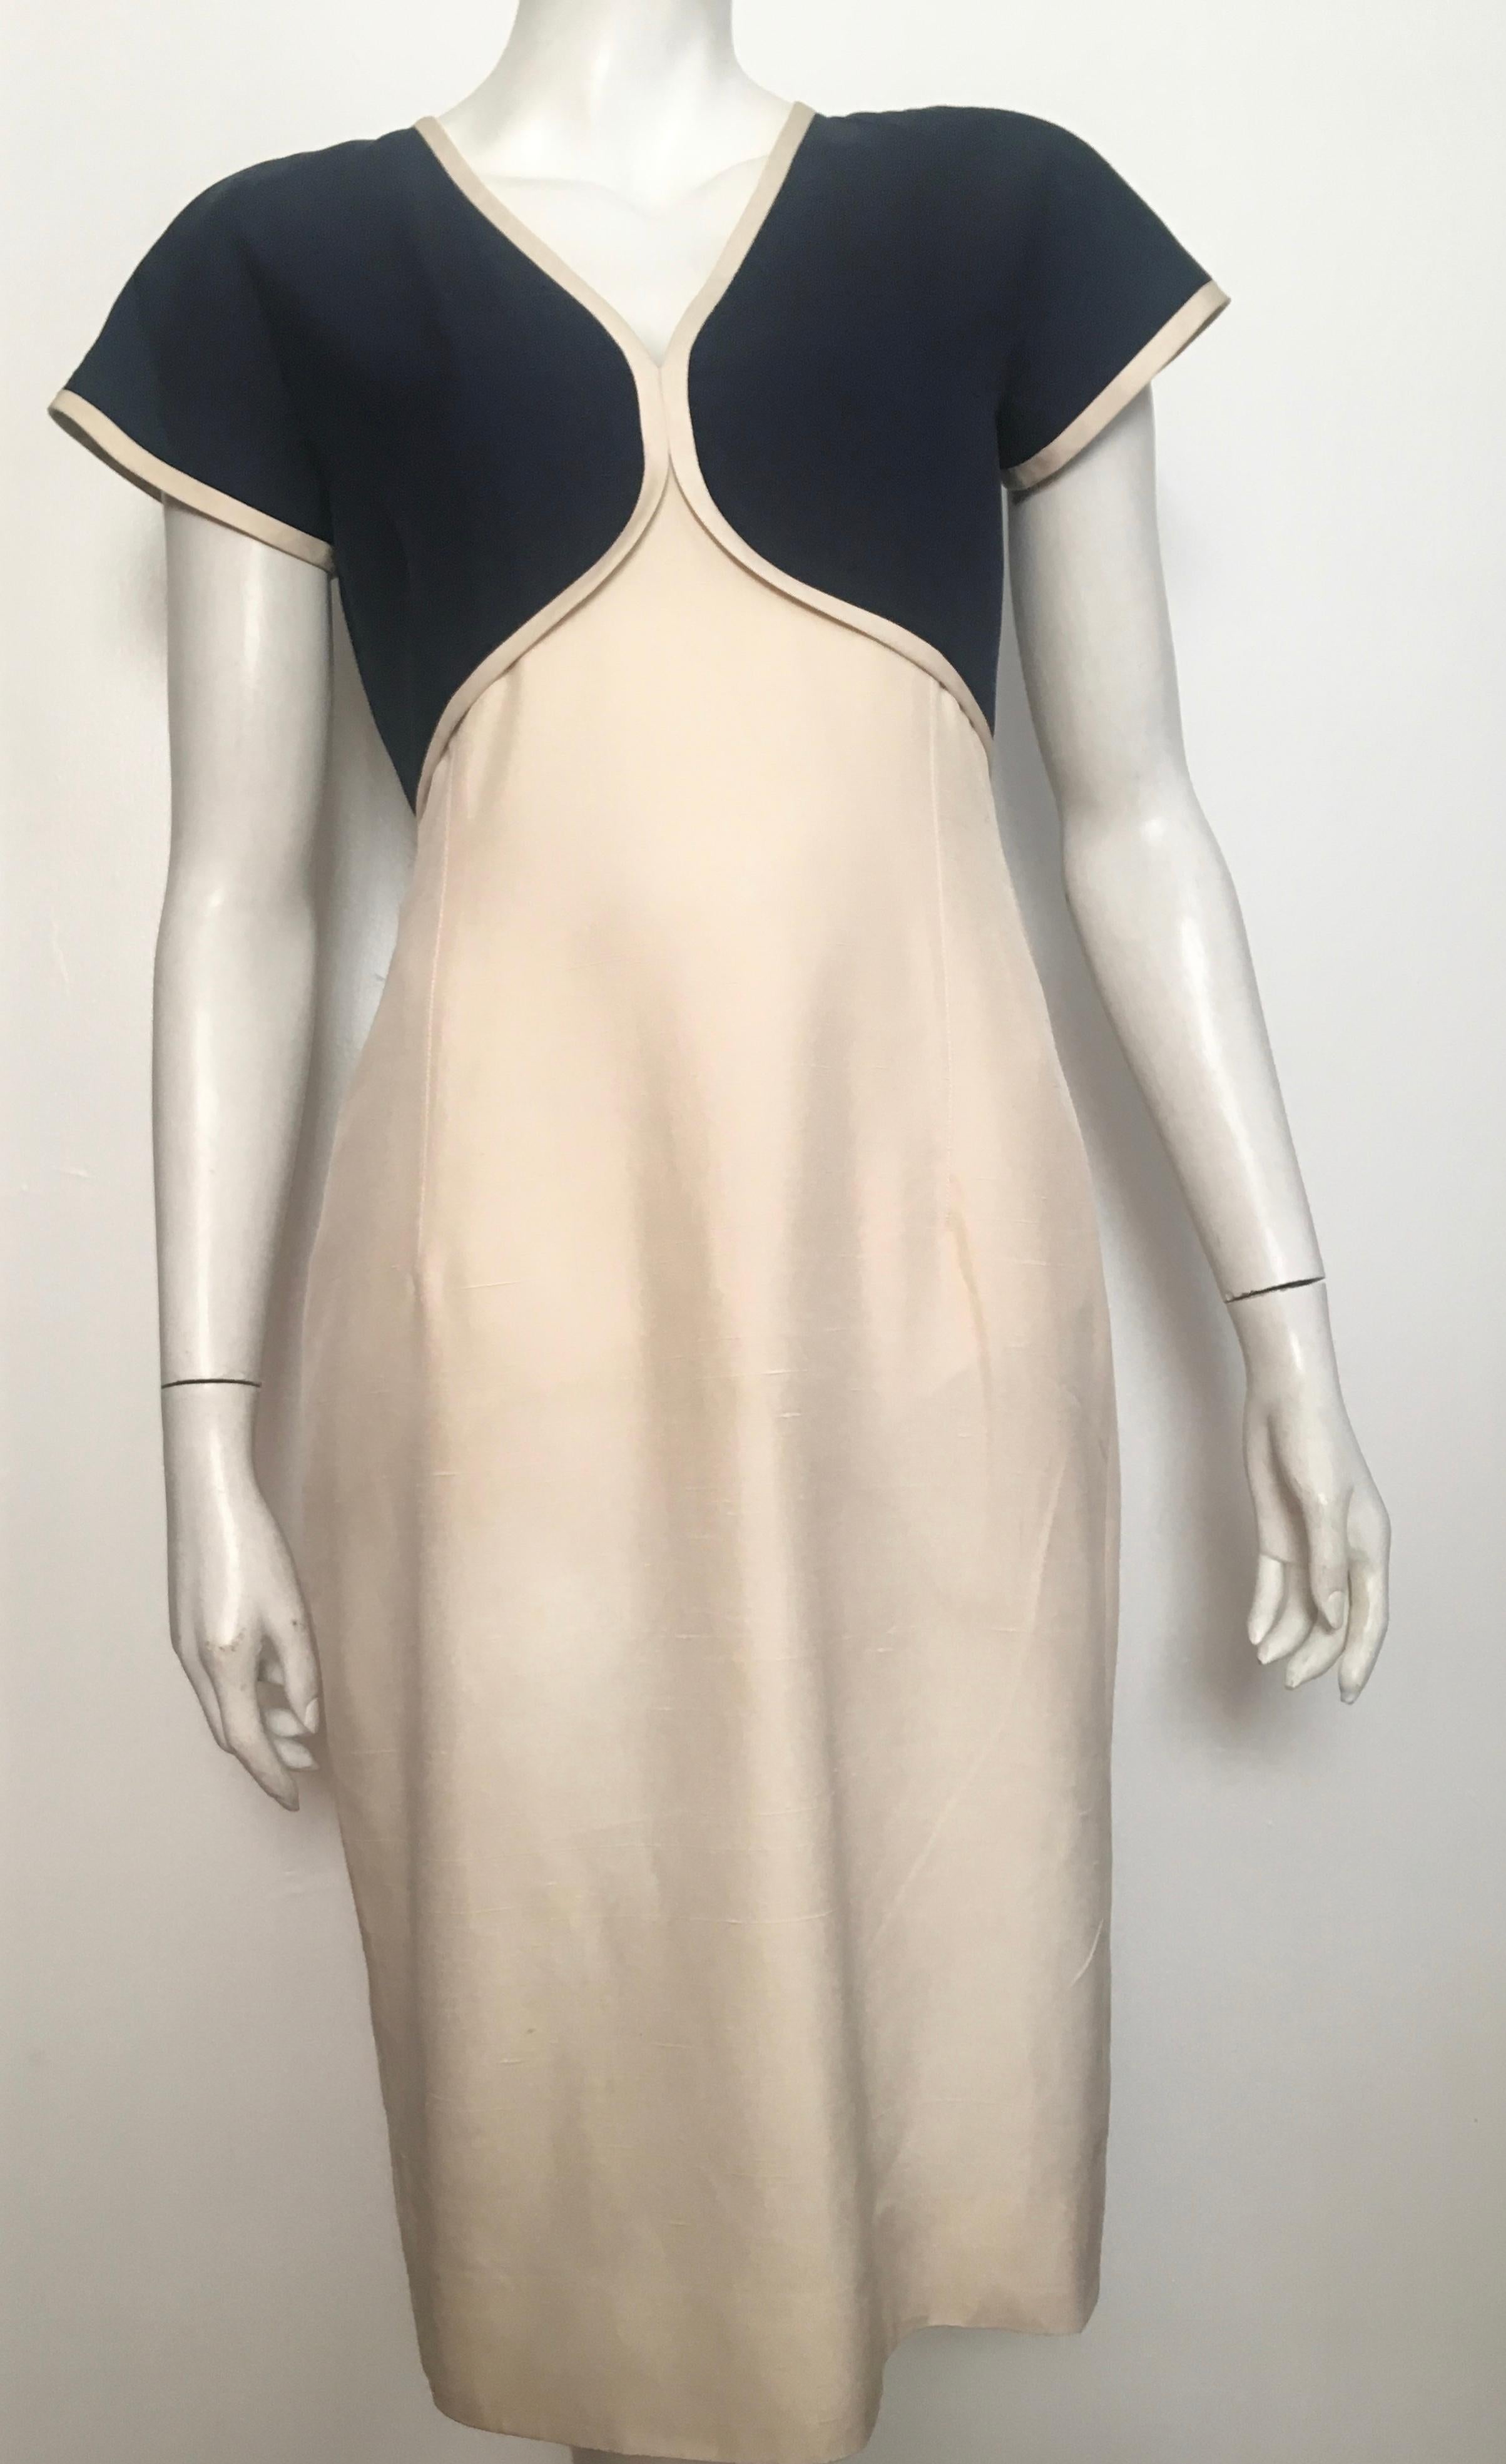 Valentino Boutique 1980s silk short sleeve navy & cream dress is labeled a size 8 but fits more like a size 6.  The waist on this dress is 29